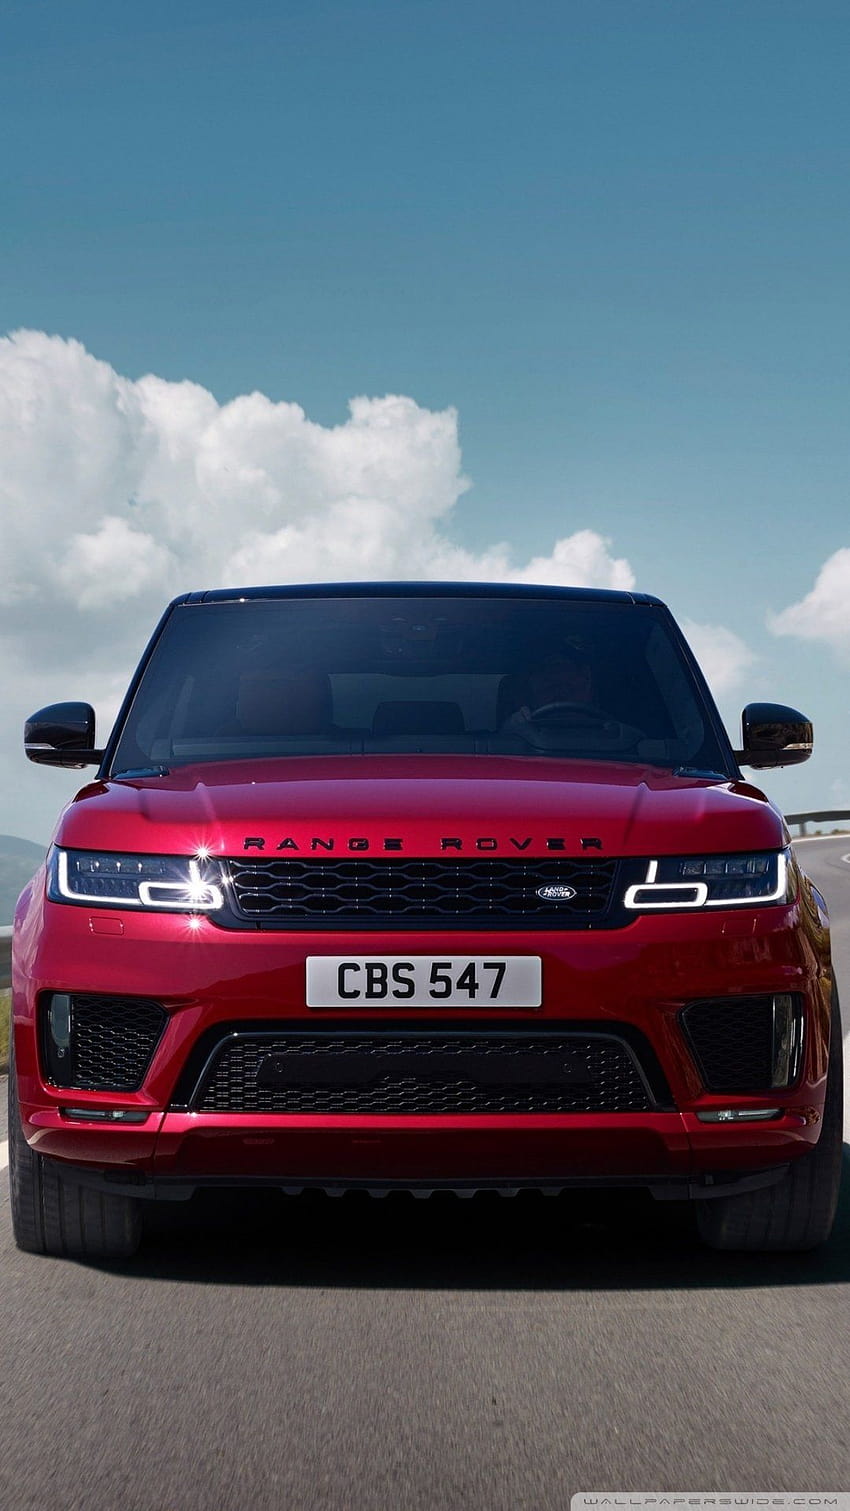 Range Rover Evoque For iPhone, range rover car iphone HD phone wallpaper